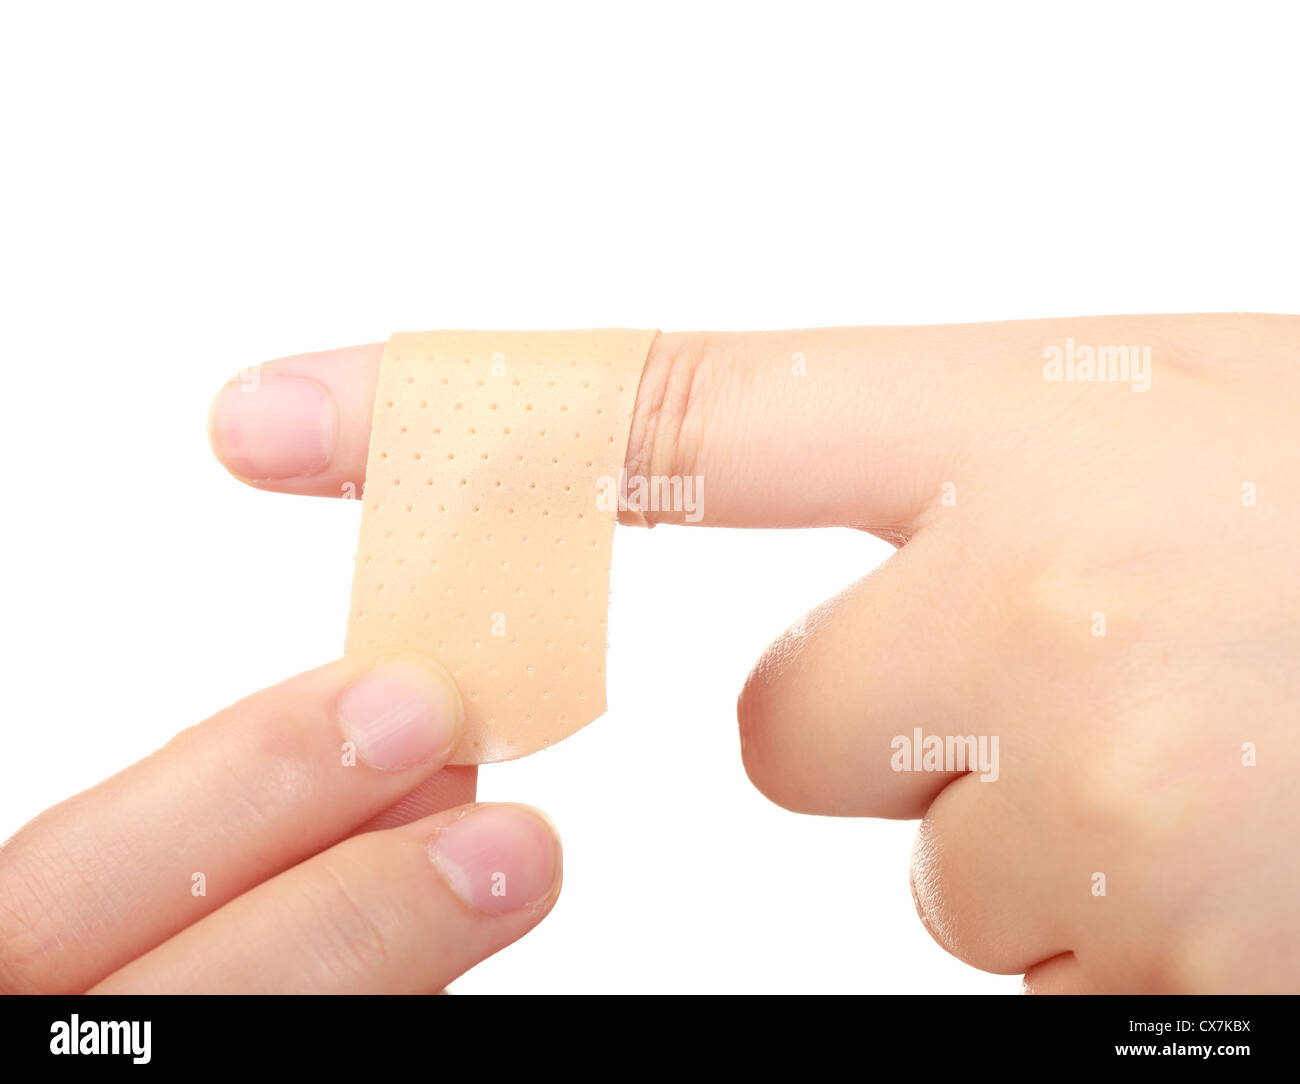 Closeup of of woman's hands with band-aid, on white background Stock Photo